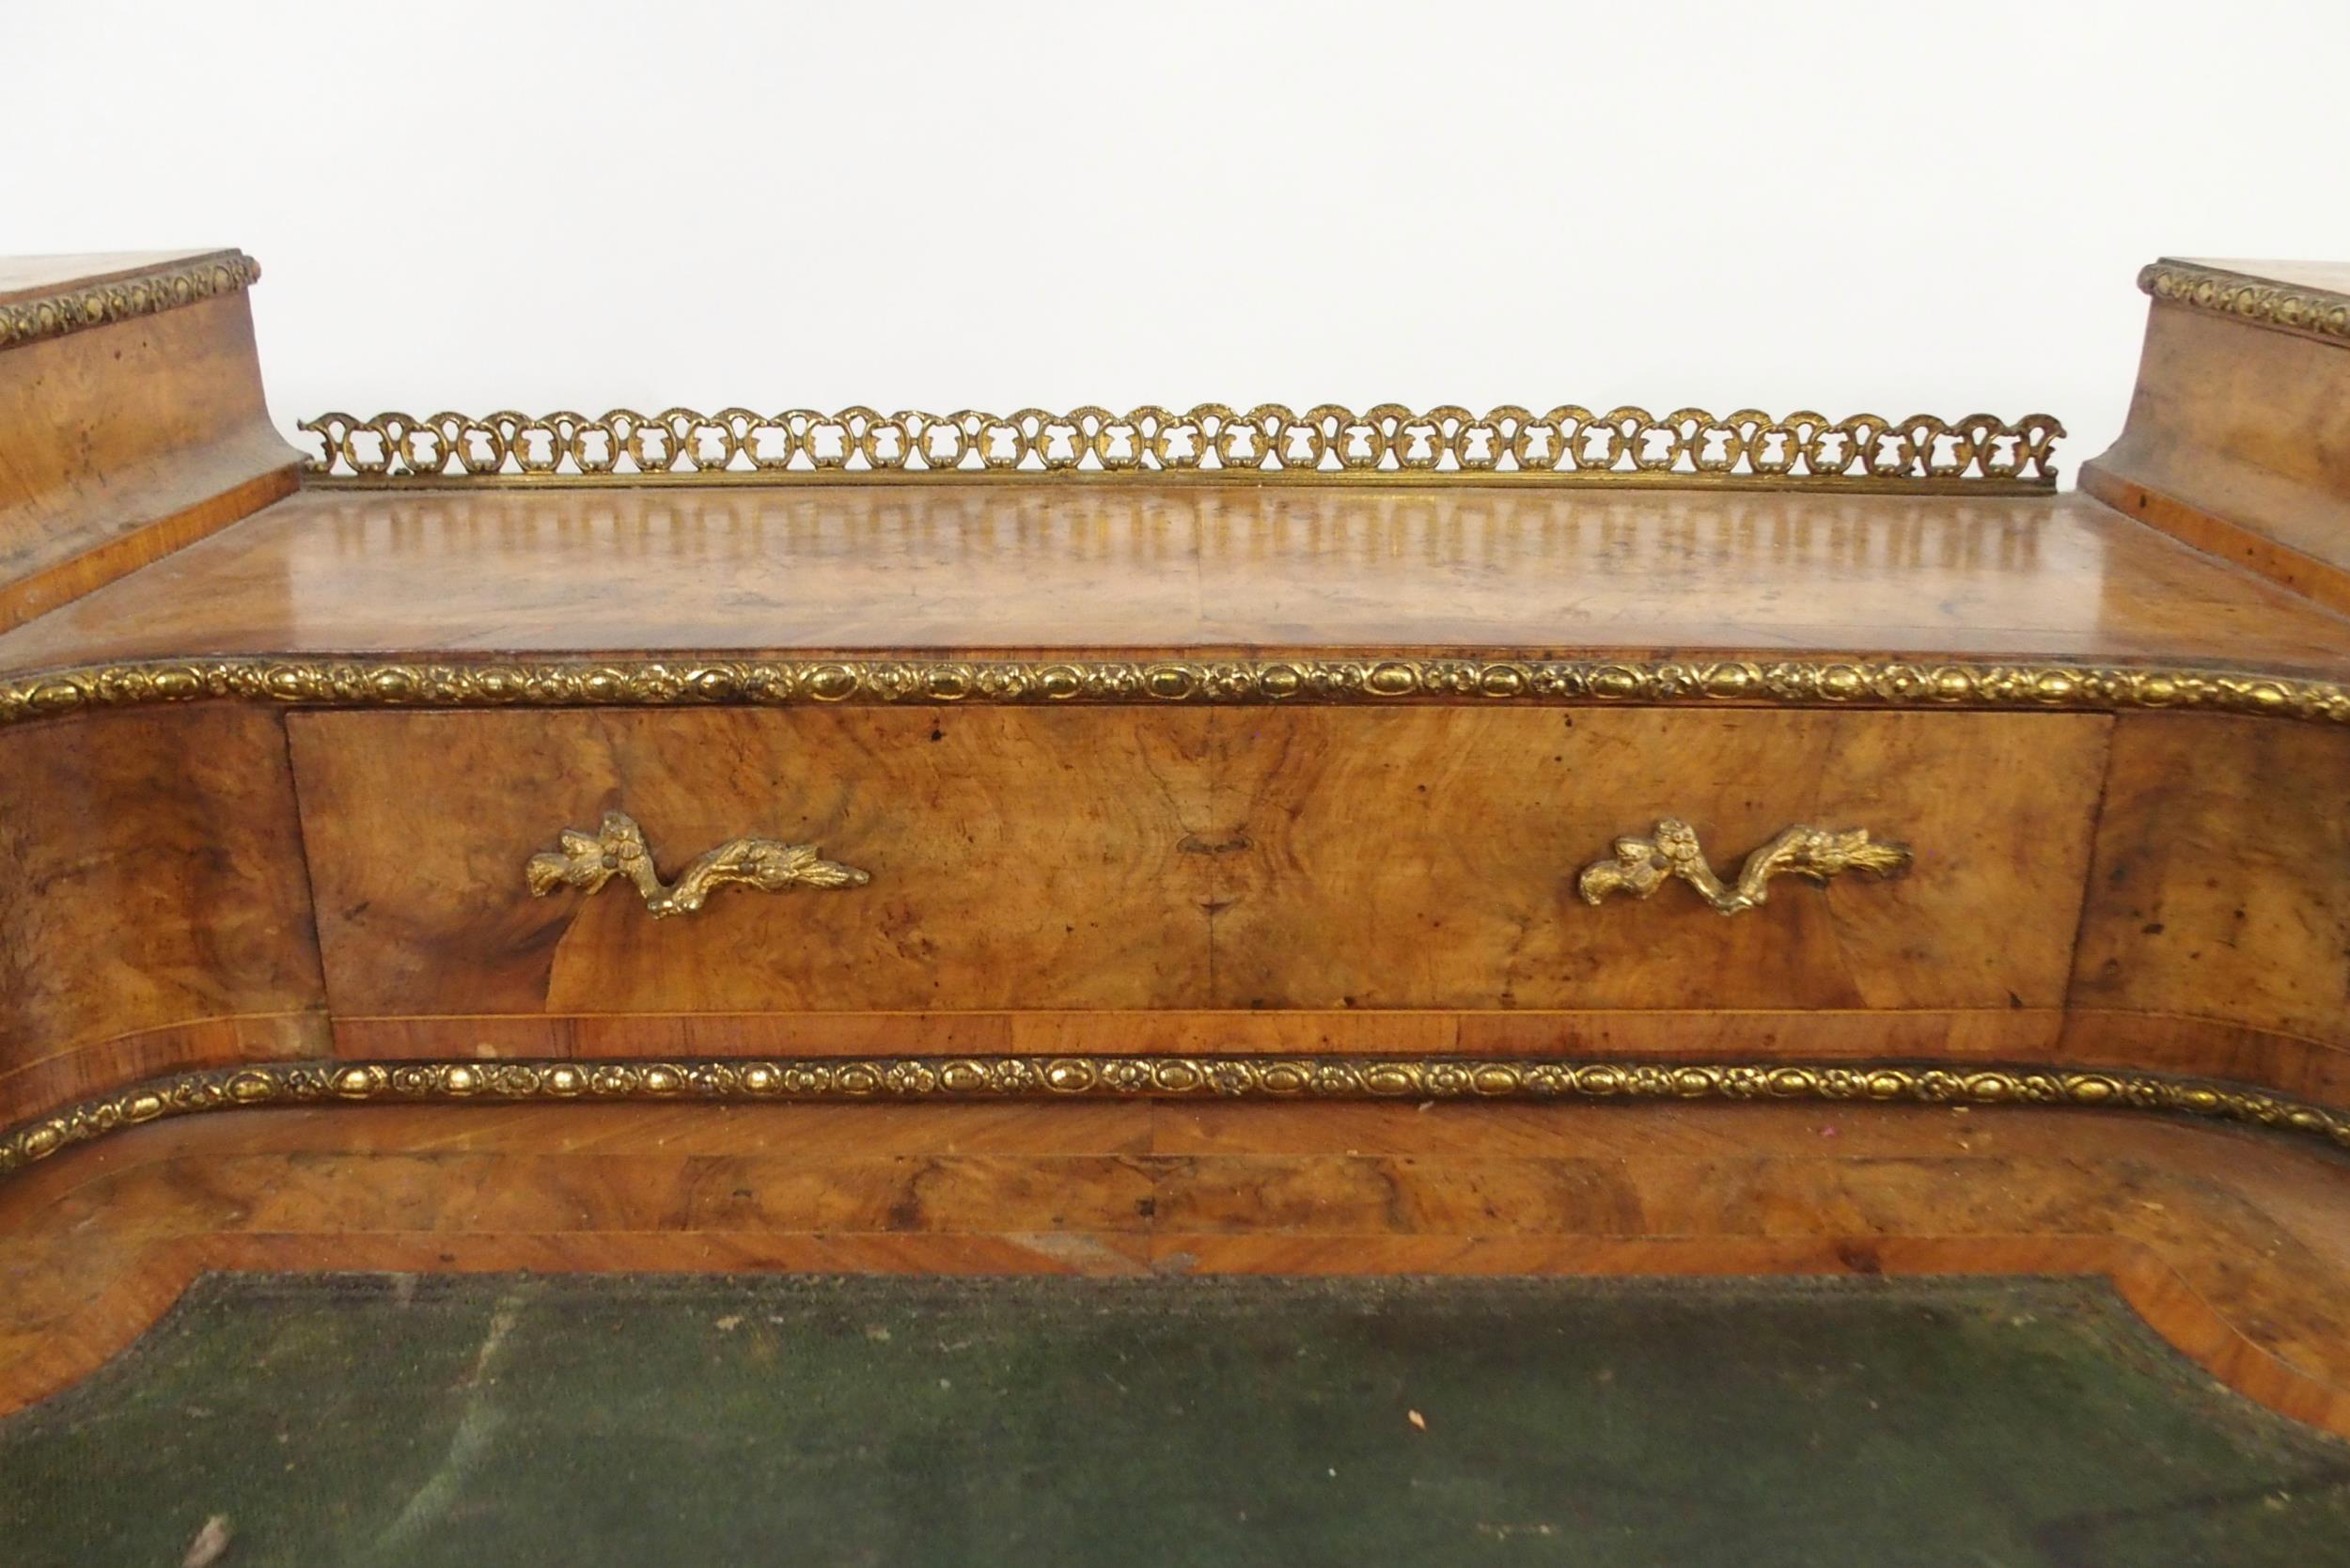 A LOUIS XVI STYLE BURR WALNUT AND ORMOLU MOUNTED BUREAU PLAT with five drawered superstructure - Image 6 of 14